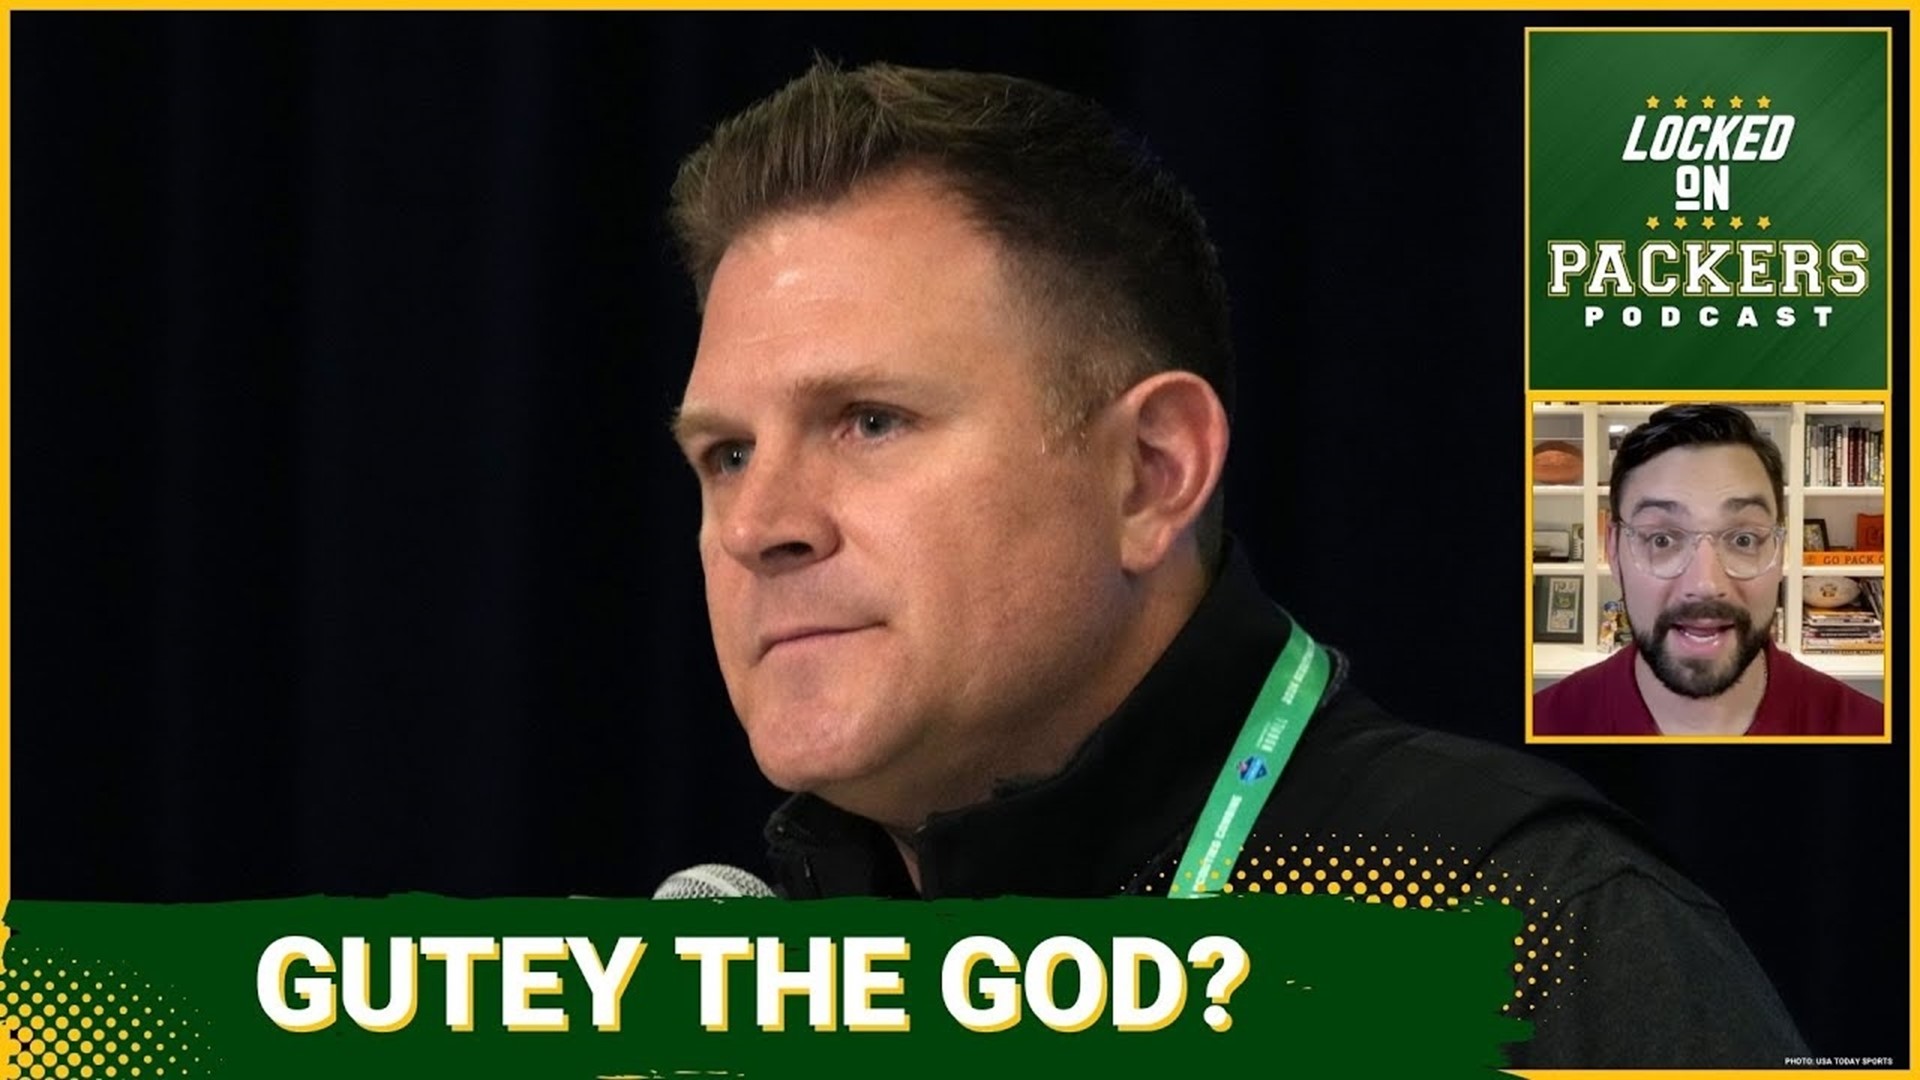 Brian Gutekunst built a Super Bowl contender with Aaron Rodgers and appears to be on the verge of doing it again with a young team led by Jordan Love.